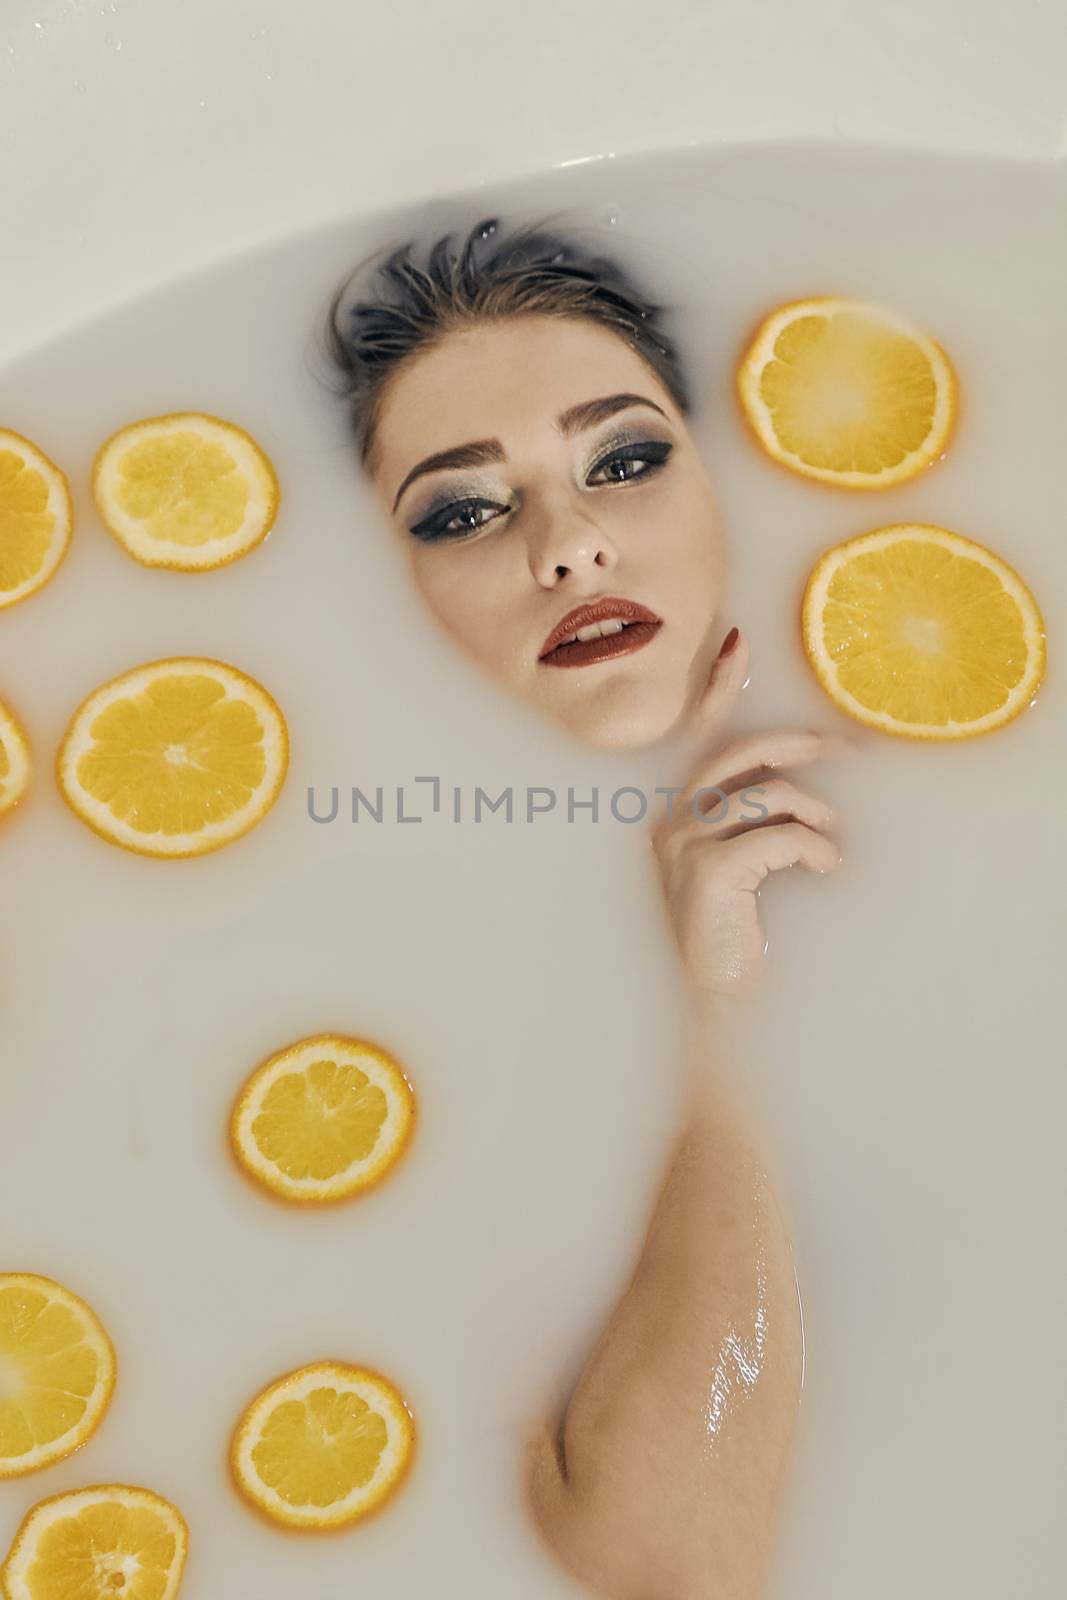 Young woman in the bath of milk and with oranges slices. Conceptual fashion photography for design. Skin care and a healthy lifestyle. Closeup naked young woman. Young woman for lifestyle design.